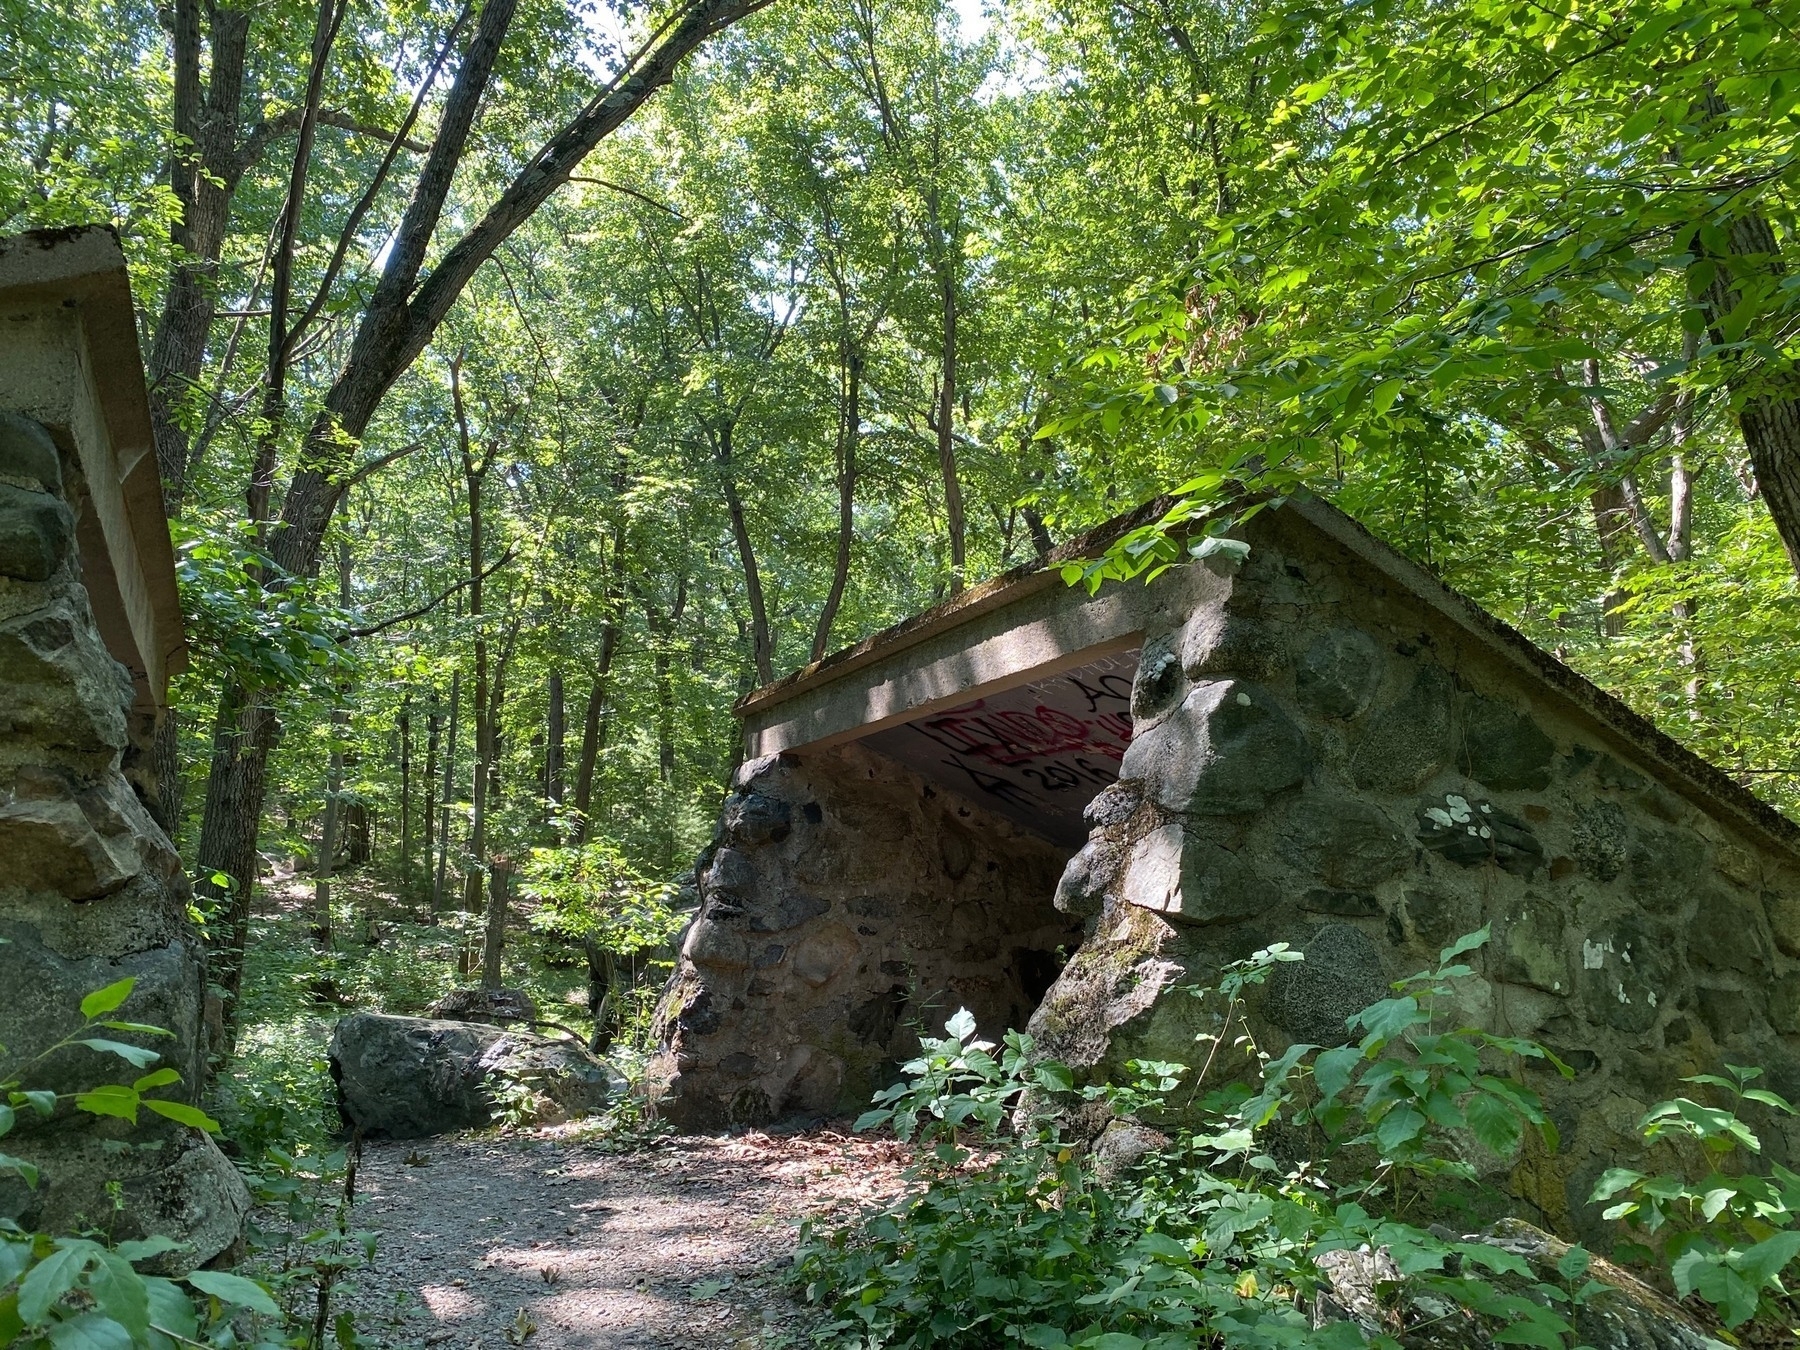 View of a small stone structure surrounded by sunlit trees.